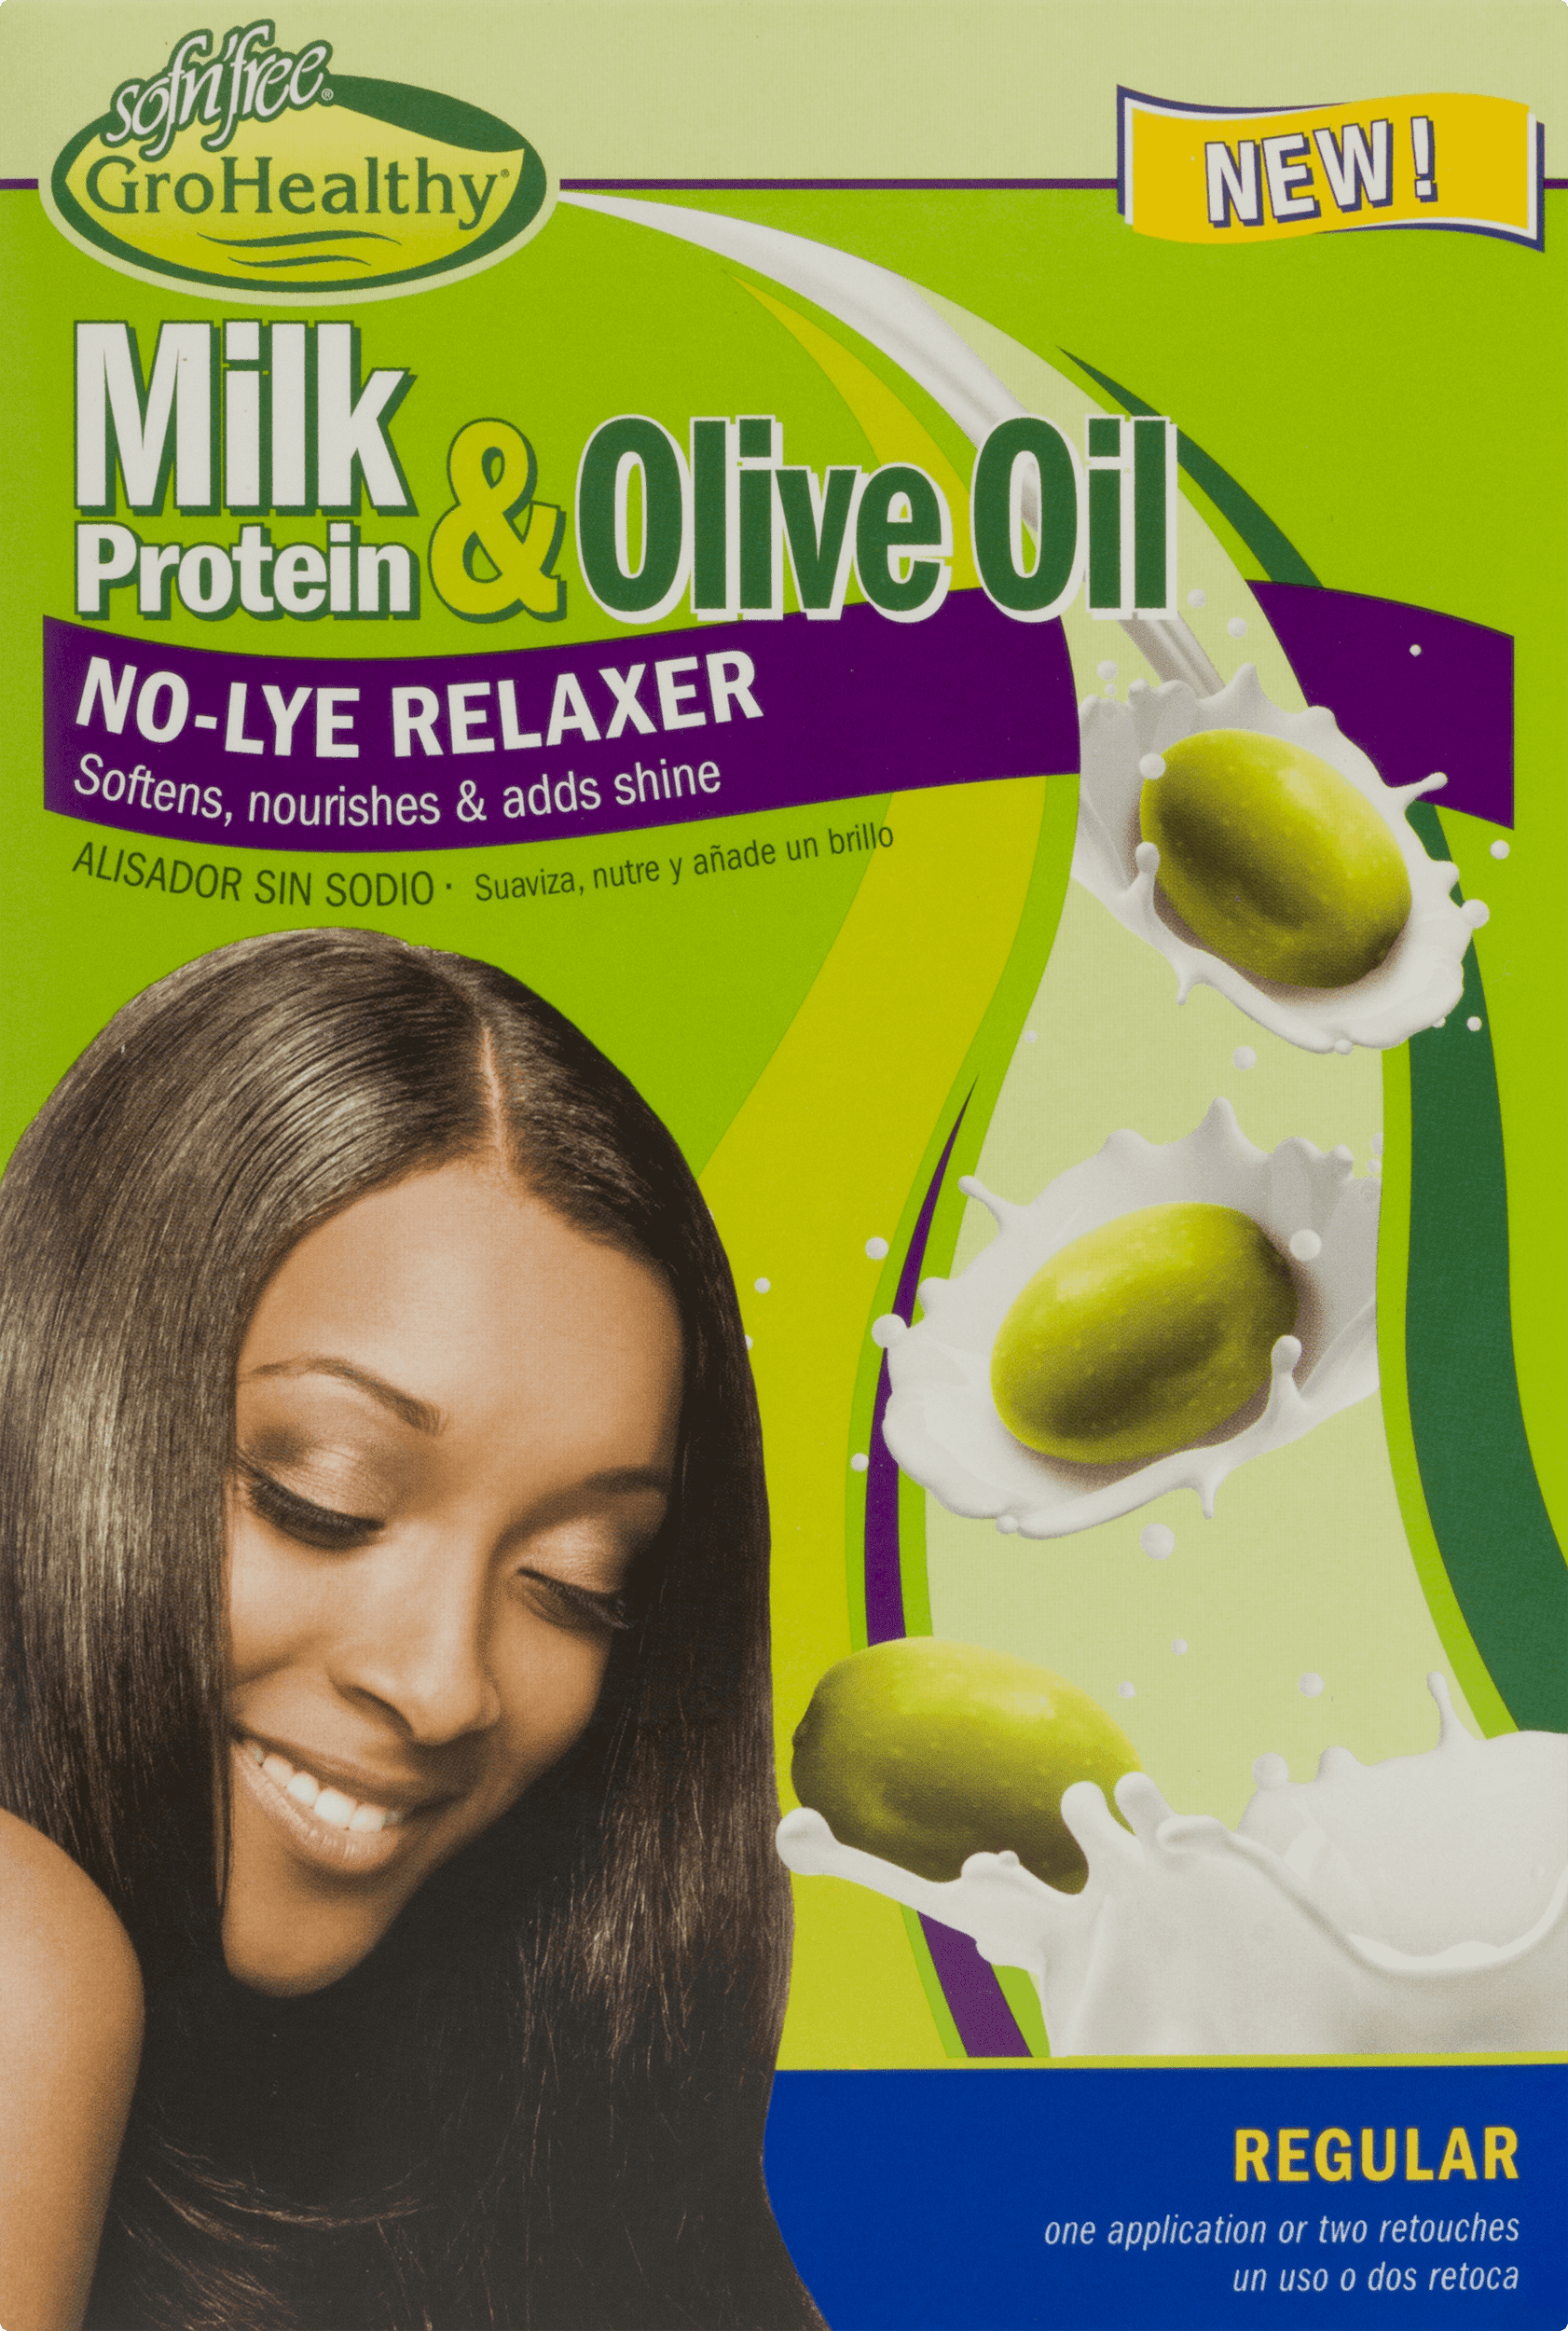 Sofn'Free GroHealthy Milk Protein & Olive Oil Relaxer 